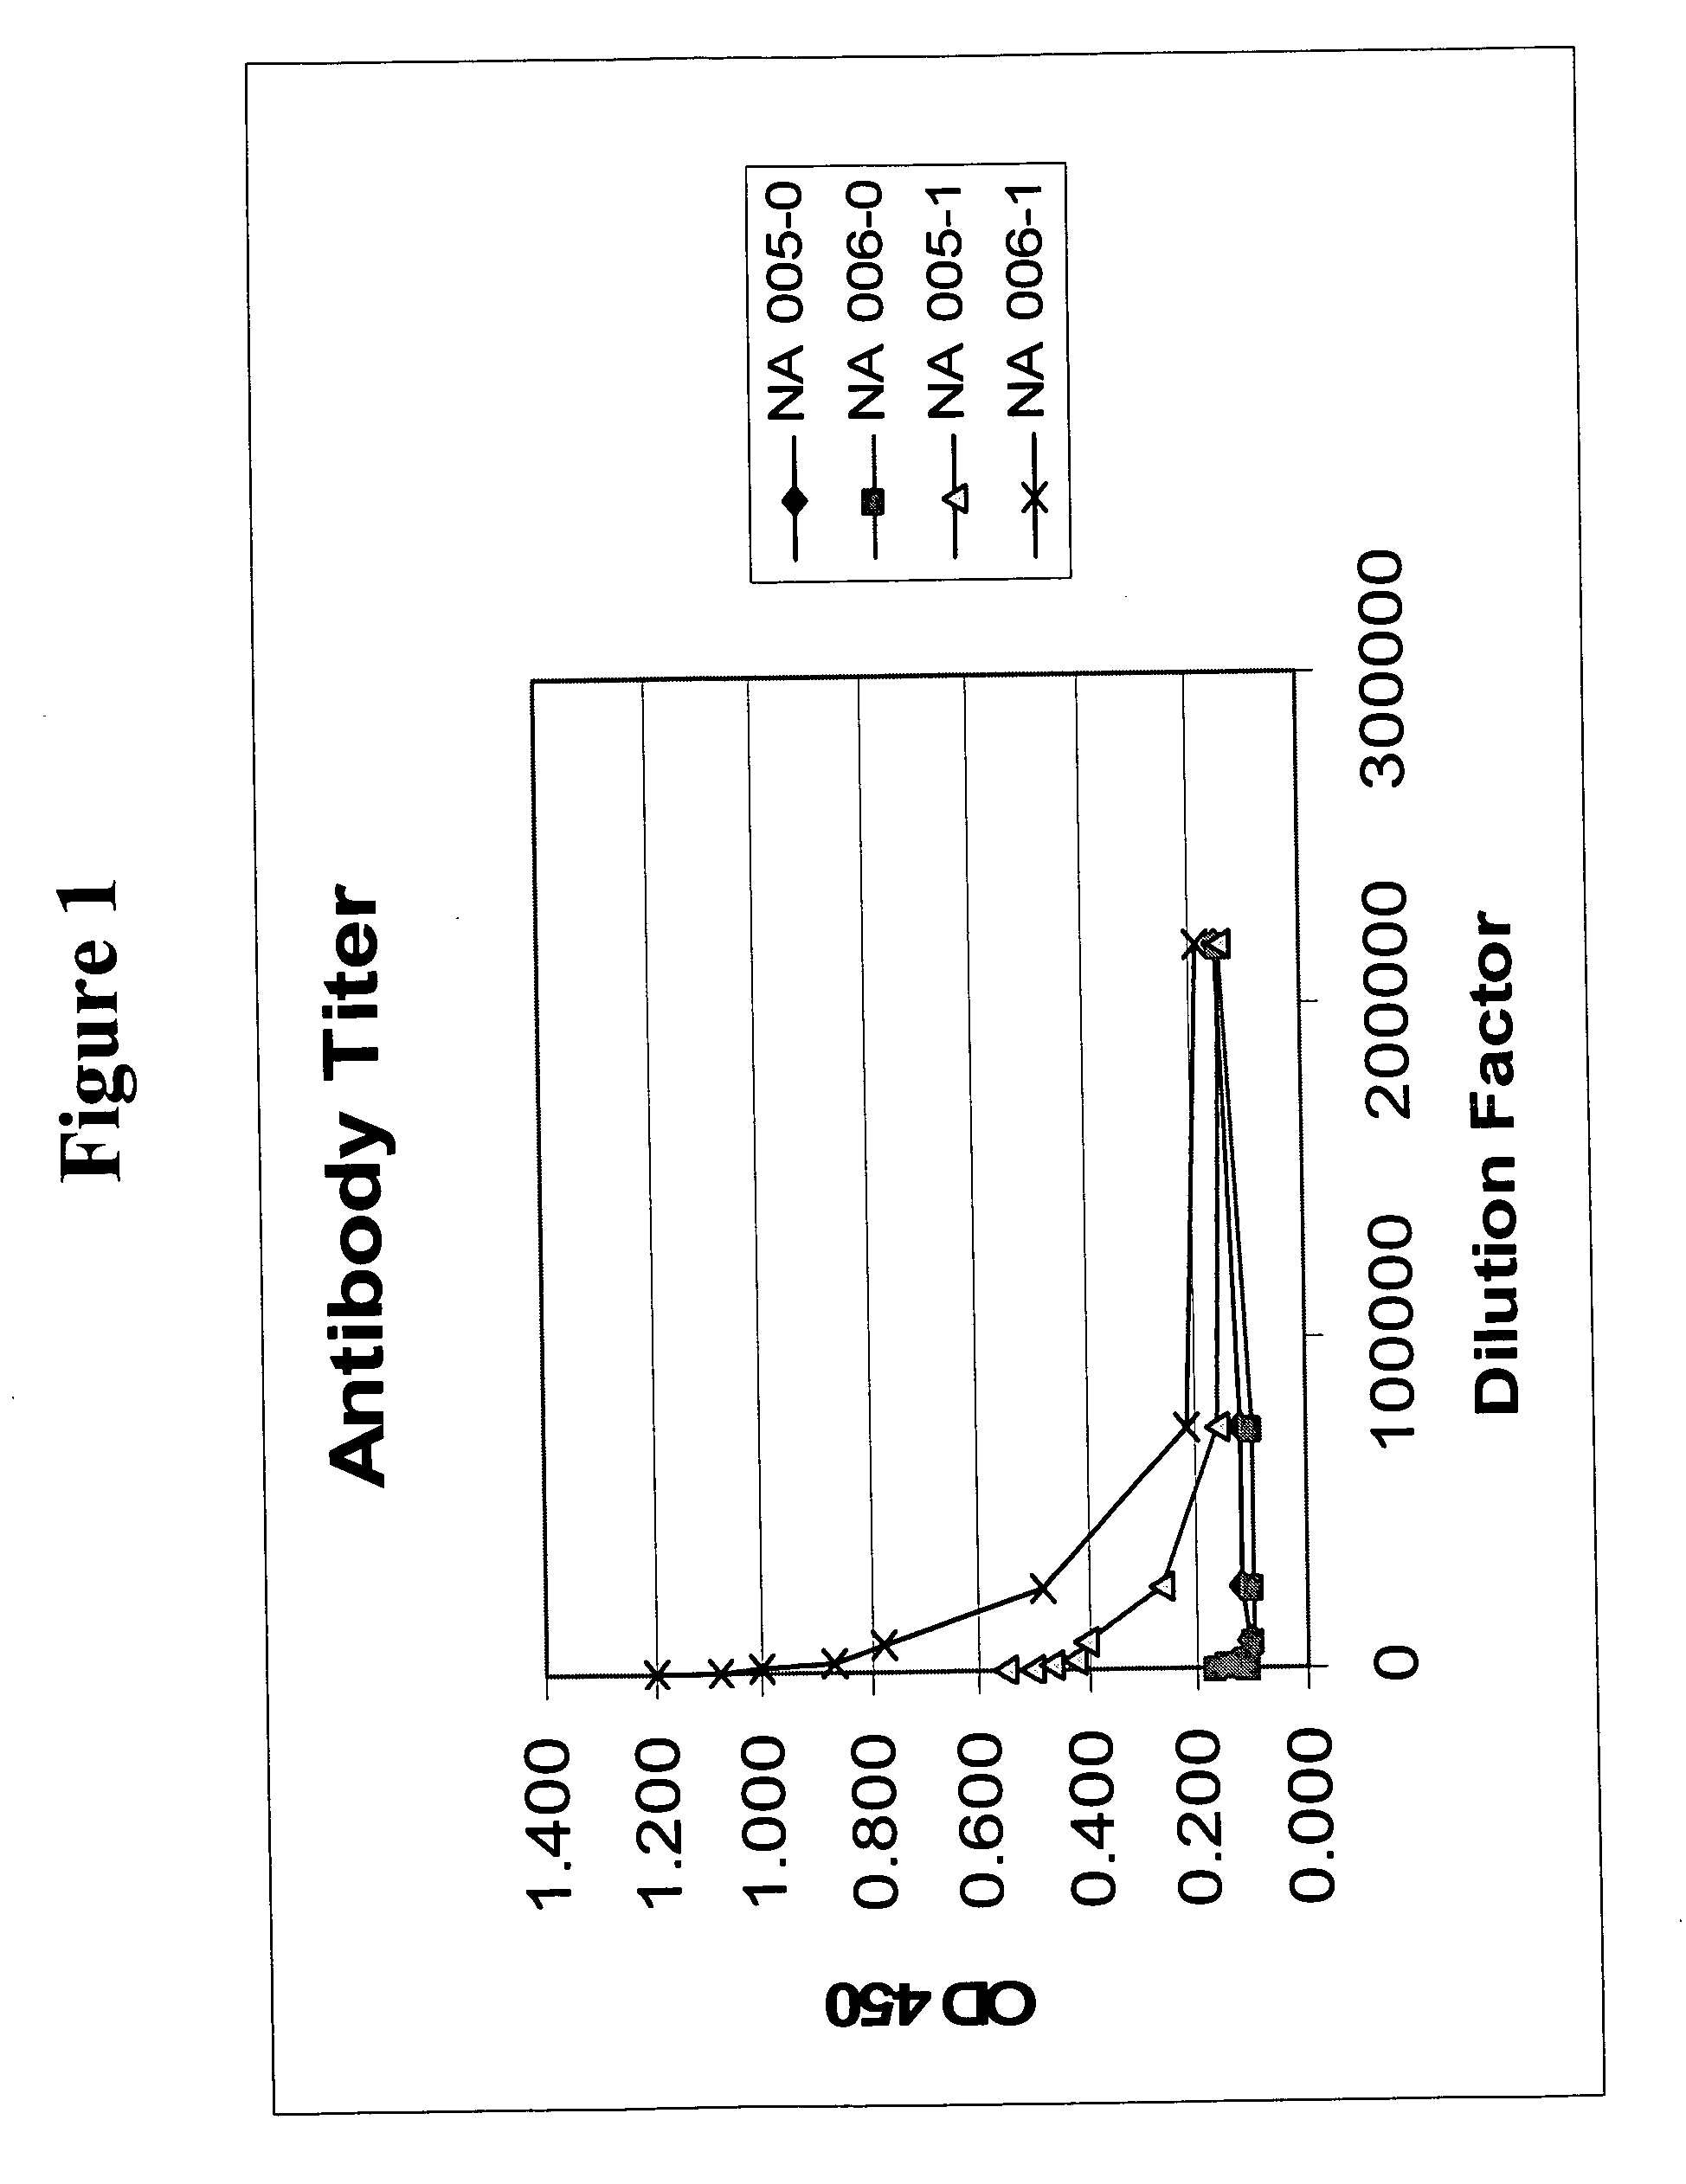 Immunoassay for specific determination of S-adenosylmethionine and analogs thereof in biological samples